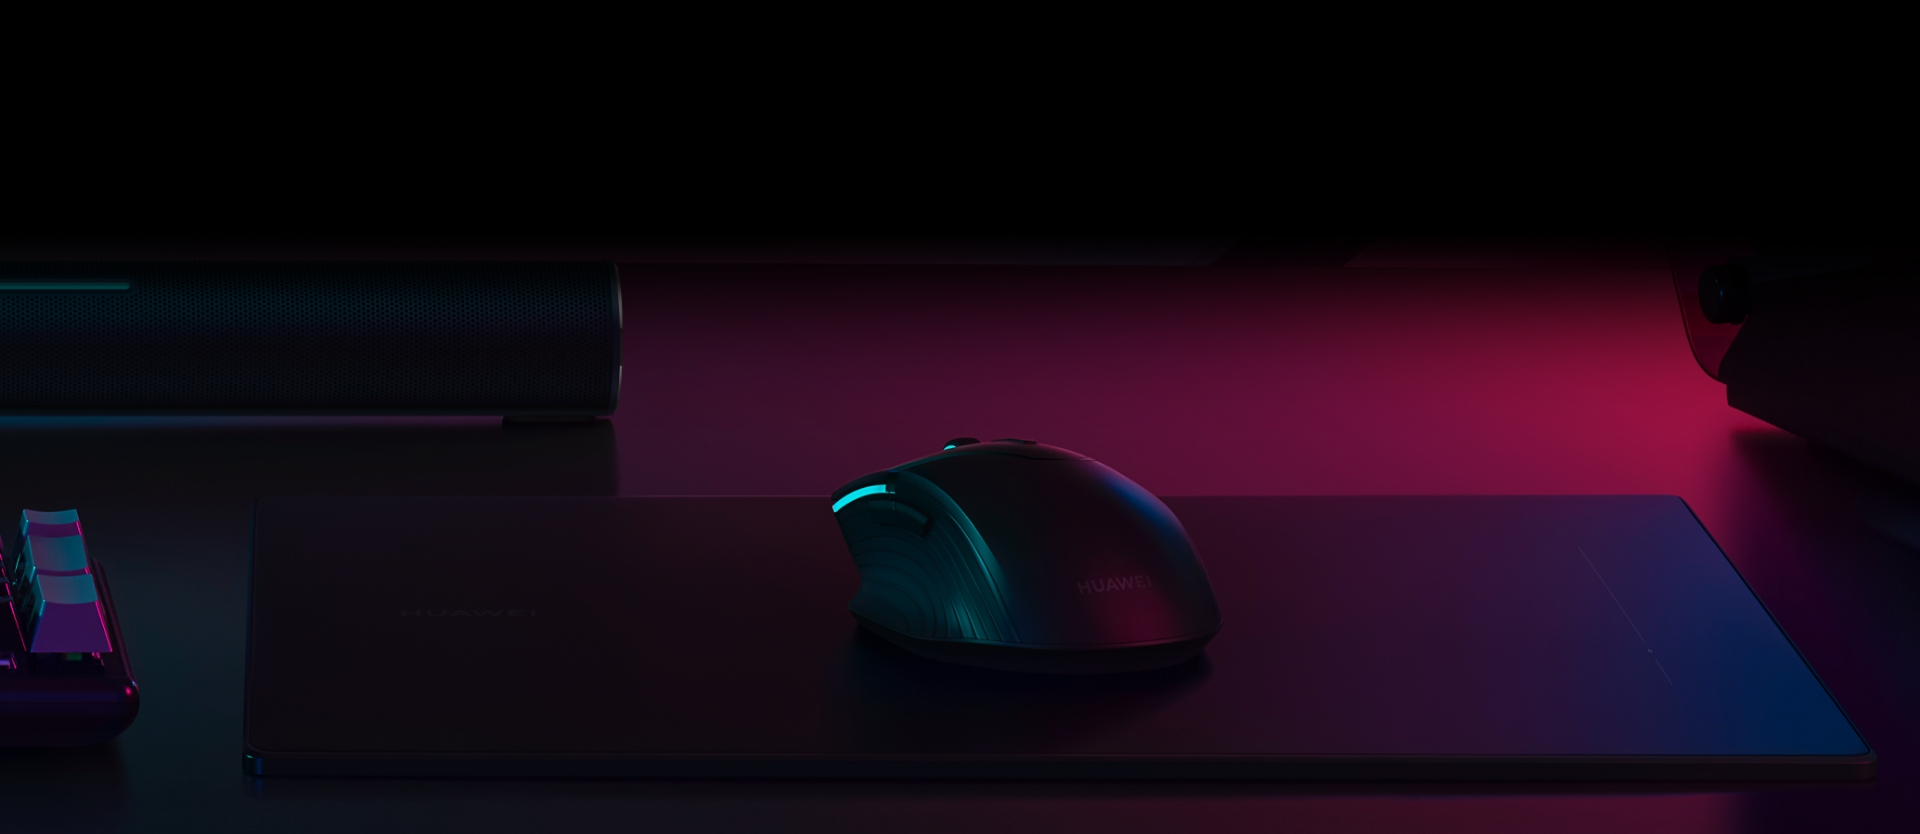 The 5 Best Wireless Mouse: Based on Reliability, Versatility, & Overall Value